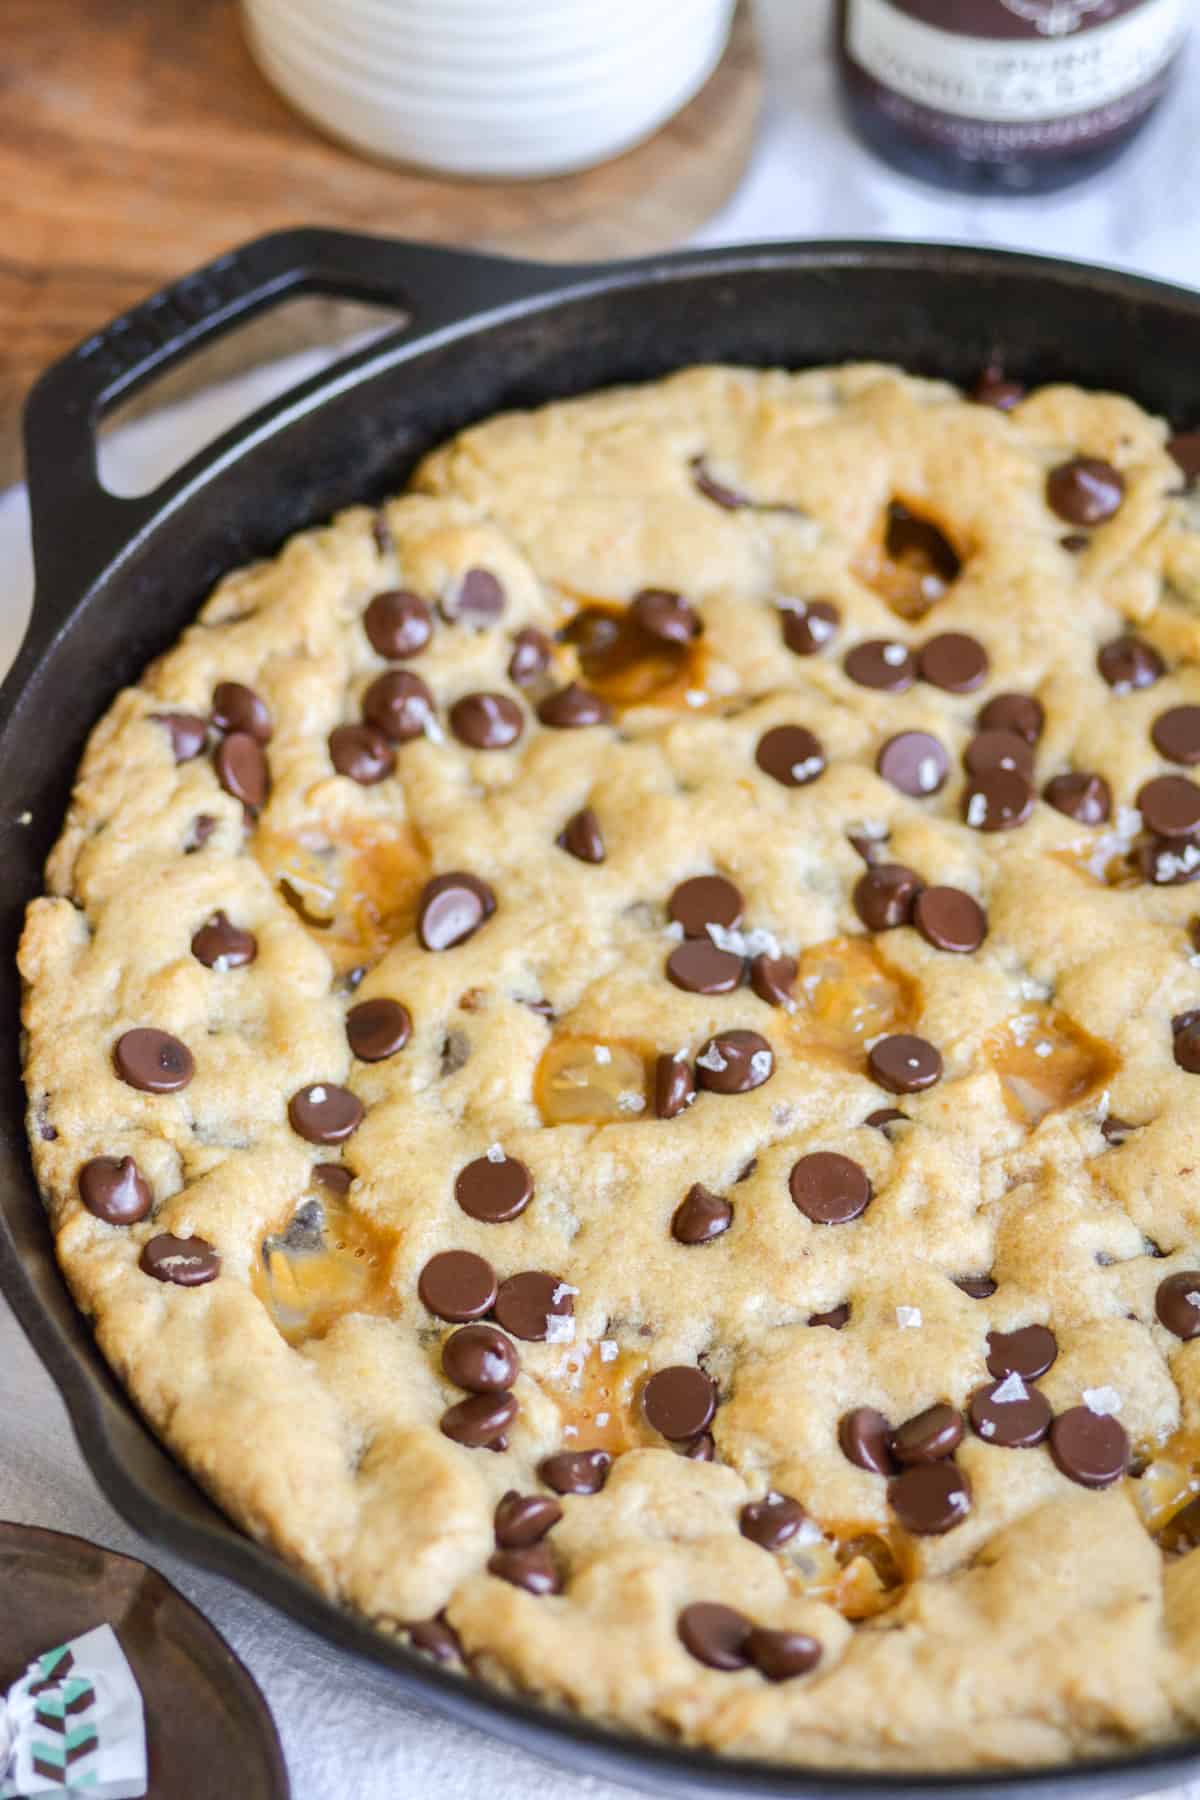 Baked Vegan Caramel Chocolate Chip Cookie Skillet in a black skillet  topped with sea salt.